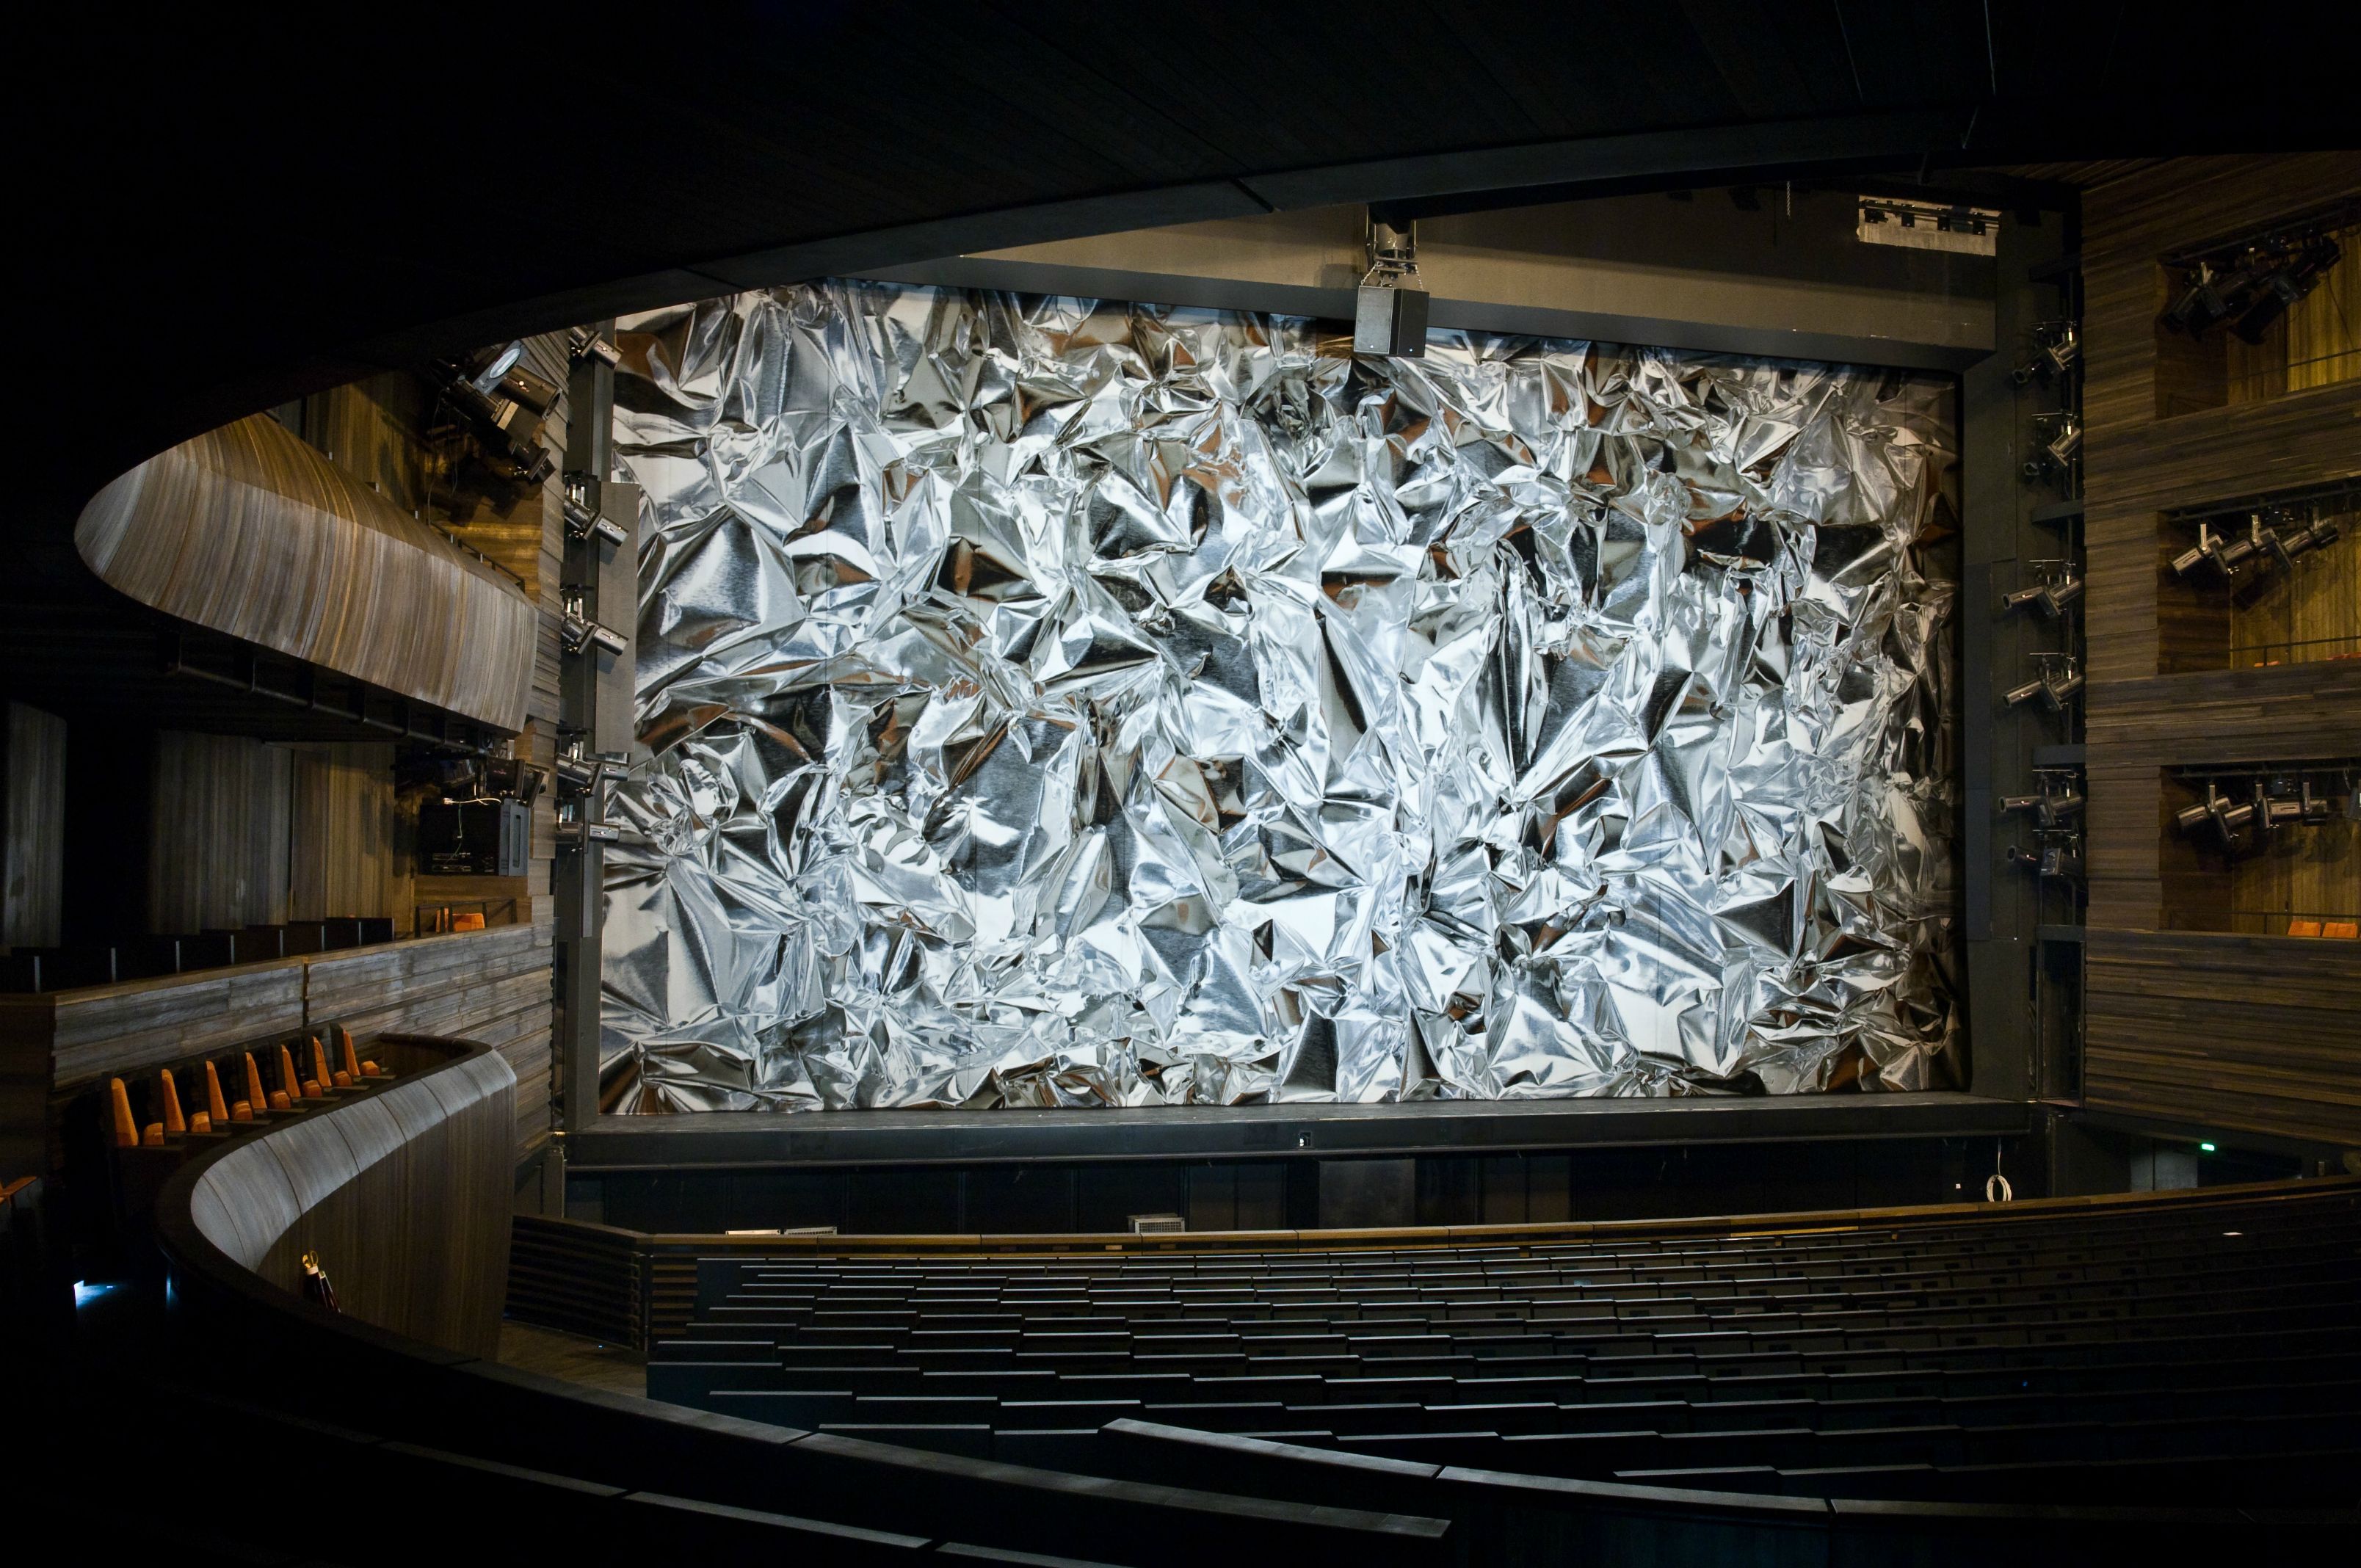 The stage curtain at the Oslo Opera House